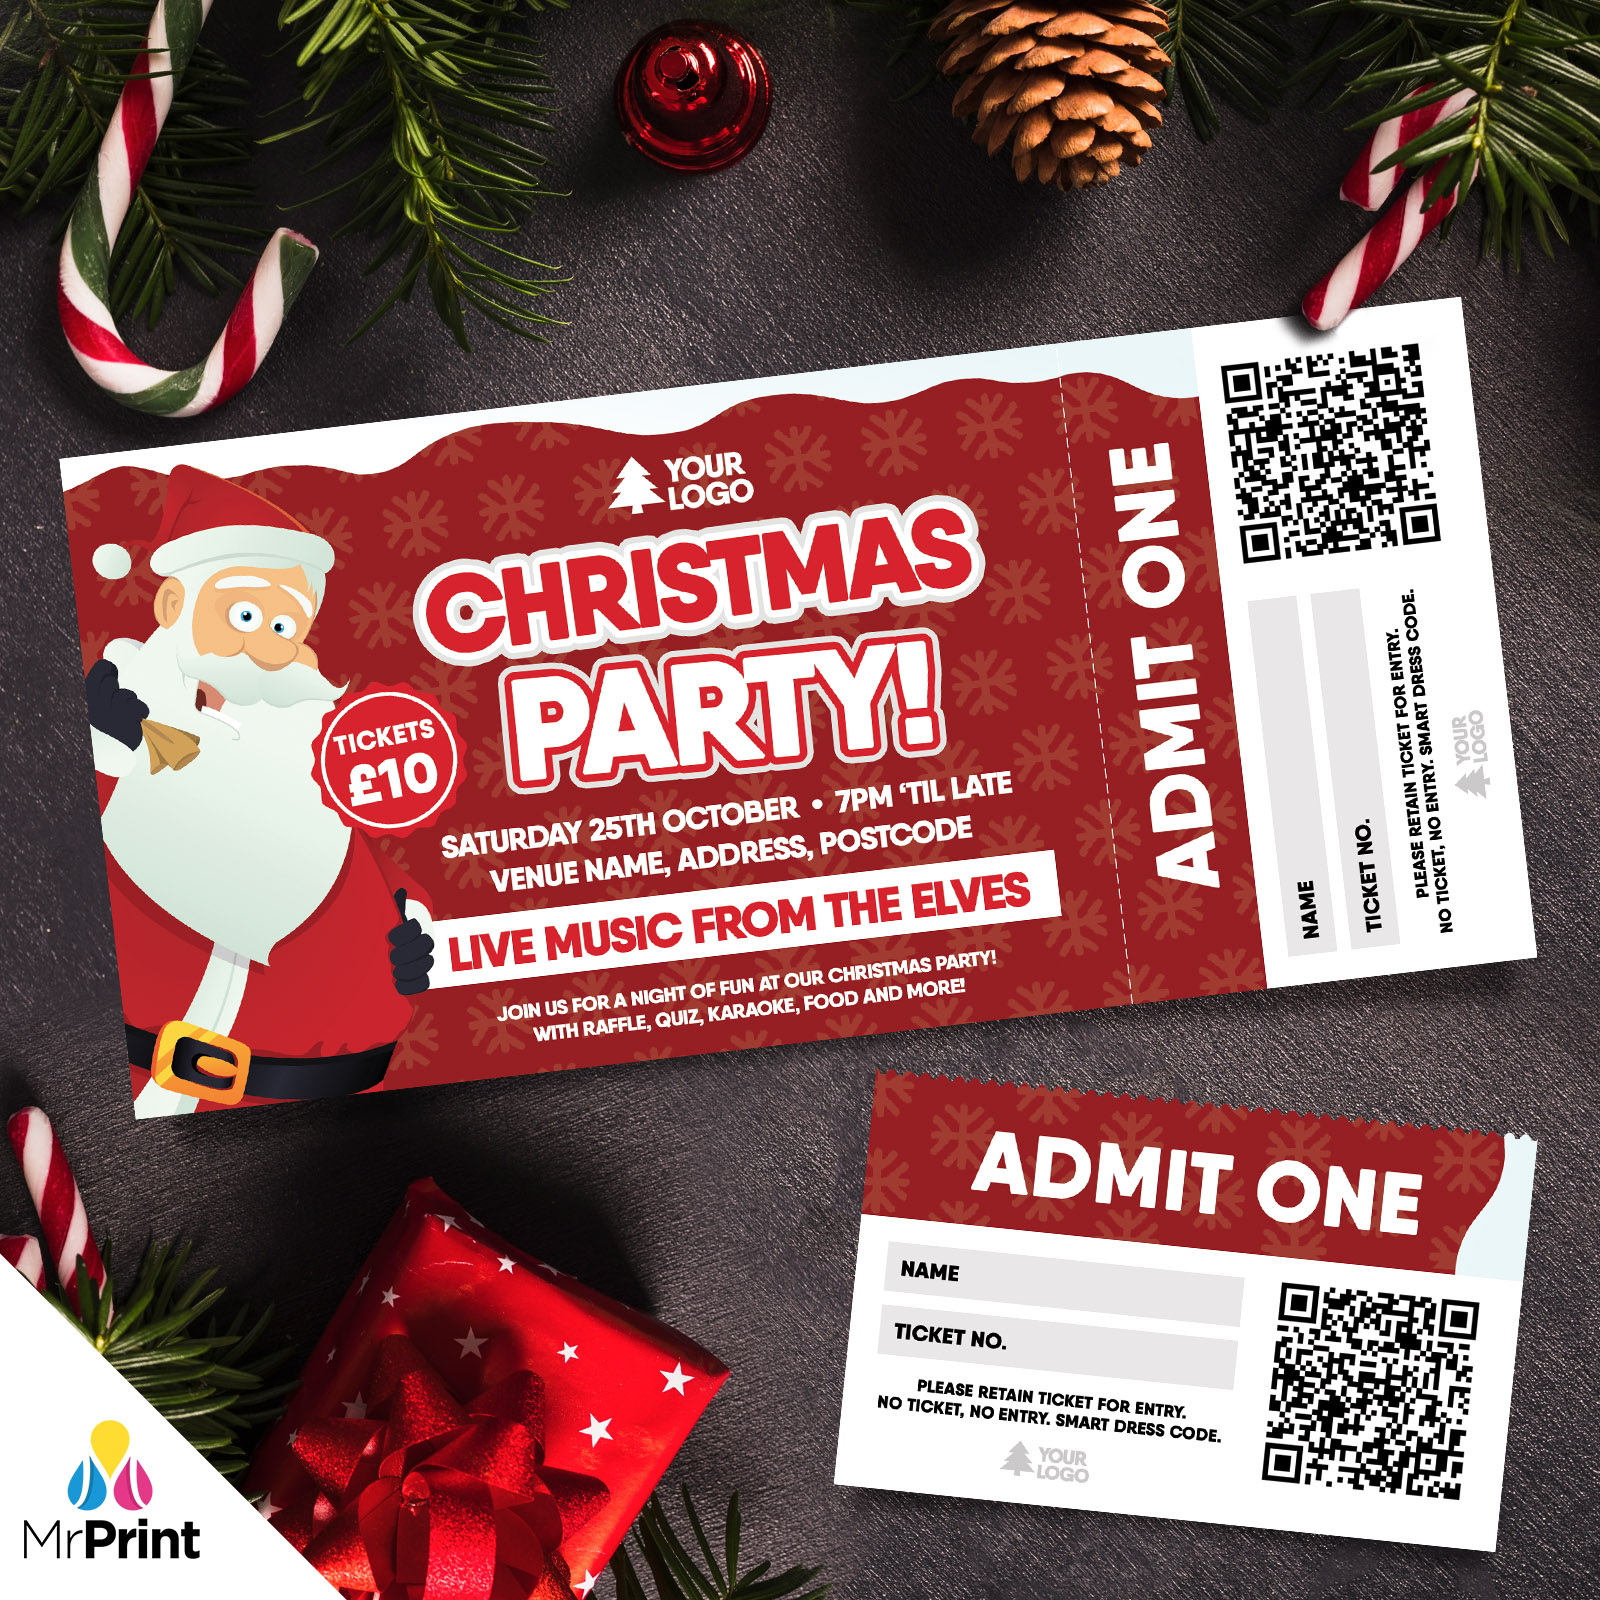 CUSTOM CHRISTMAS PARTY TICKET PRINTING PERFORATED STUBS ANY EVENT